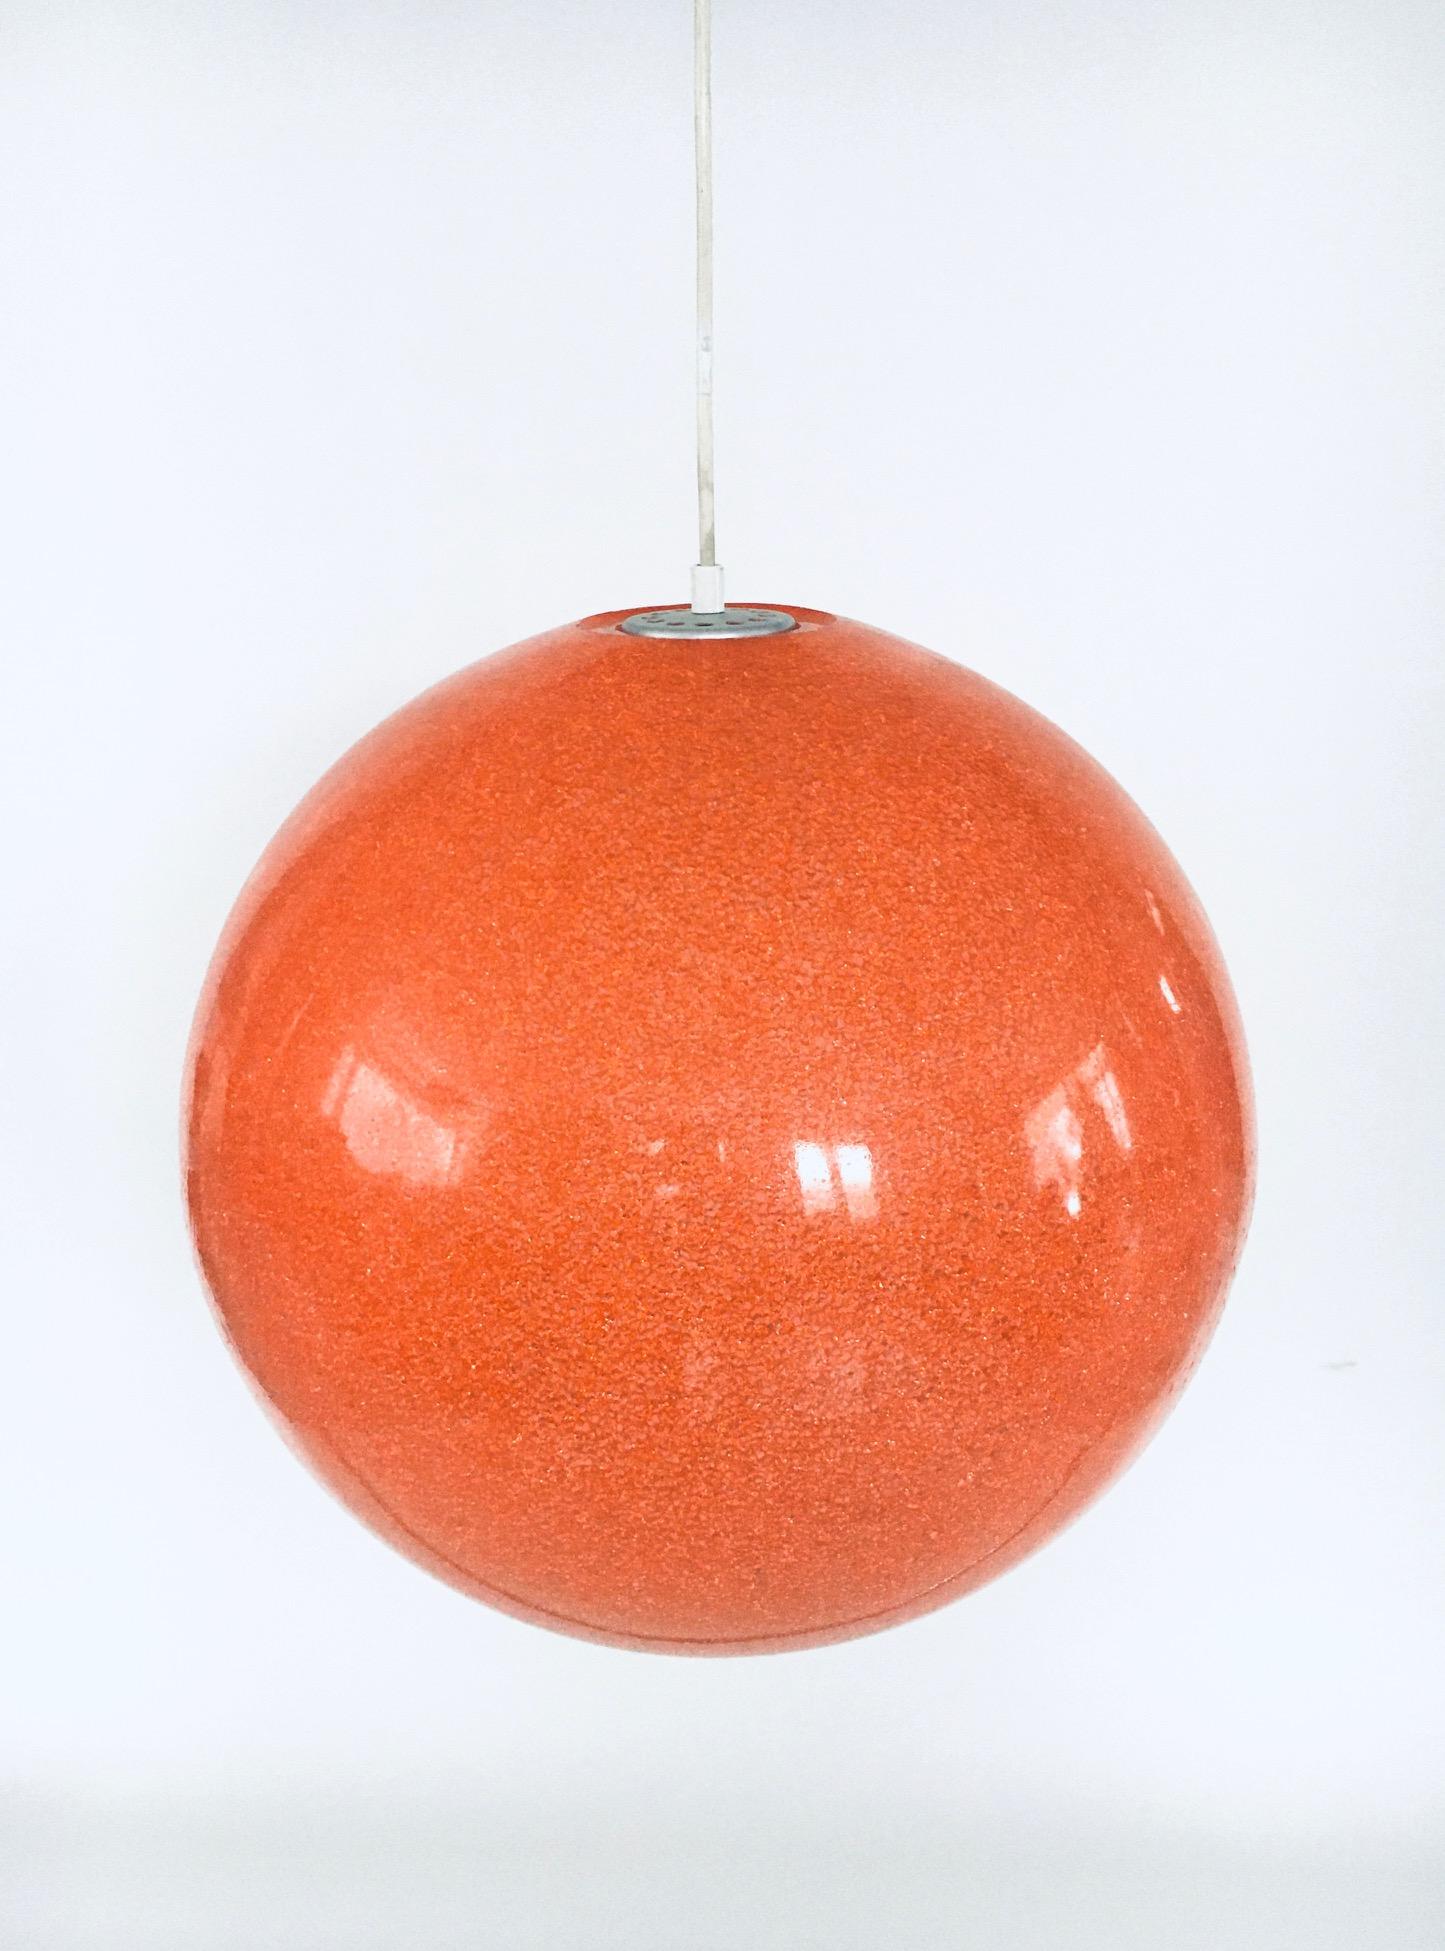 Vintage XL Spherical Orange Resin Pendant Hanging Lamp. Made in Italy, 1960's. No maker markings. In the style of the sugarball lamps by Erco or by Rotaflex. XL orange resin sugarball plastic with smooth outer surface ball lamp. Very large and rare